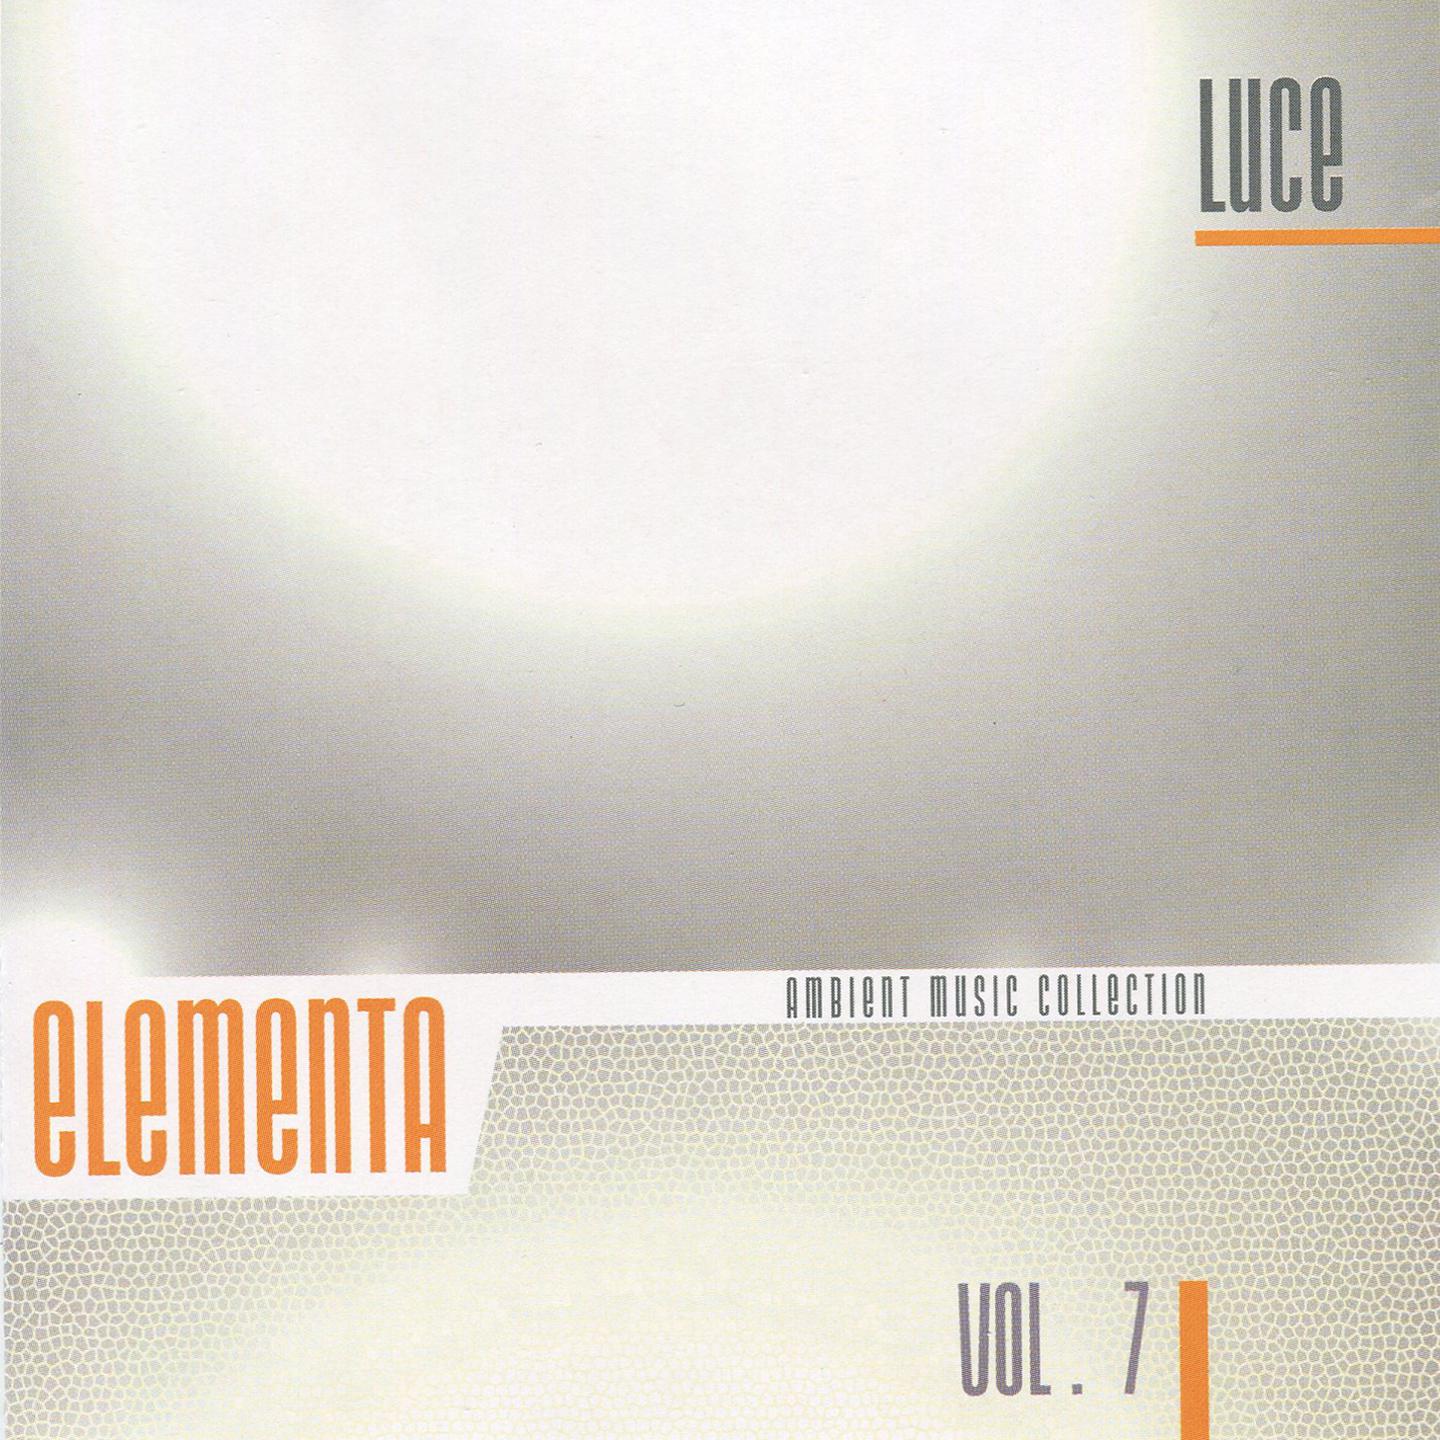 Elementa: Ambient Music Collection, Vol. 7